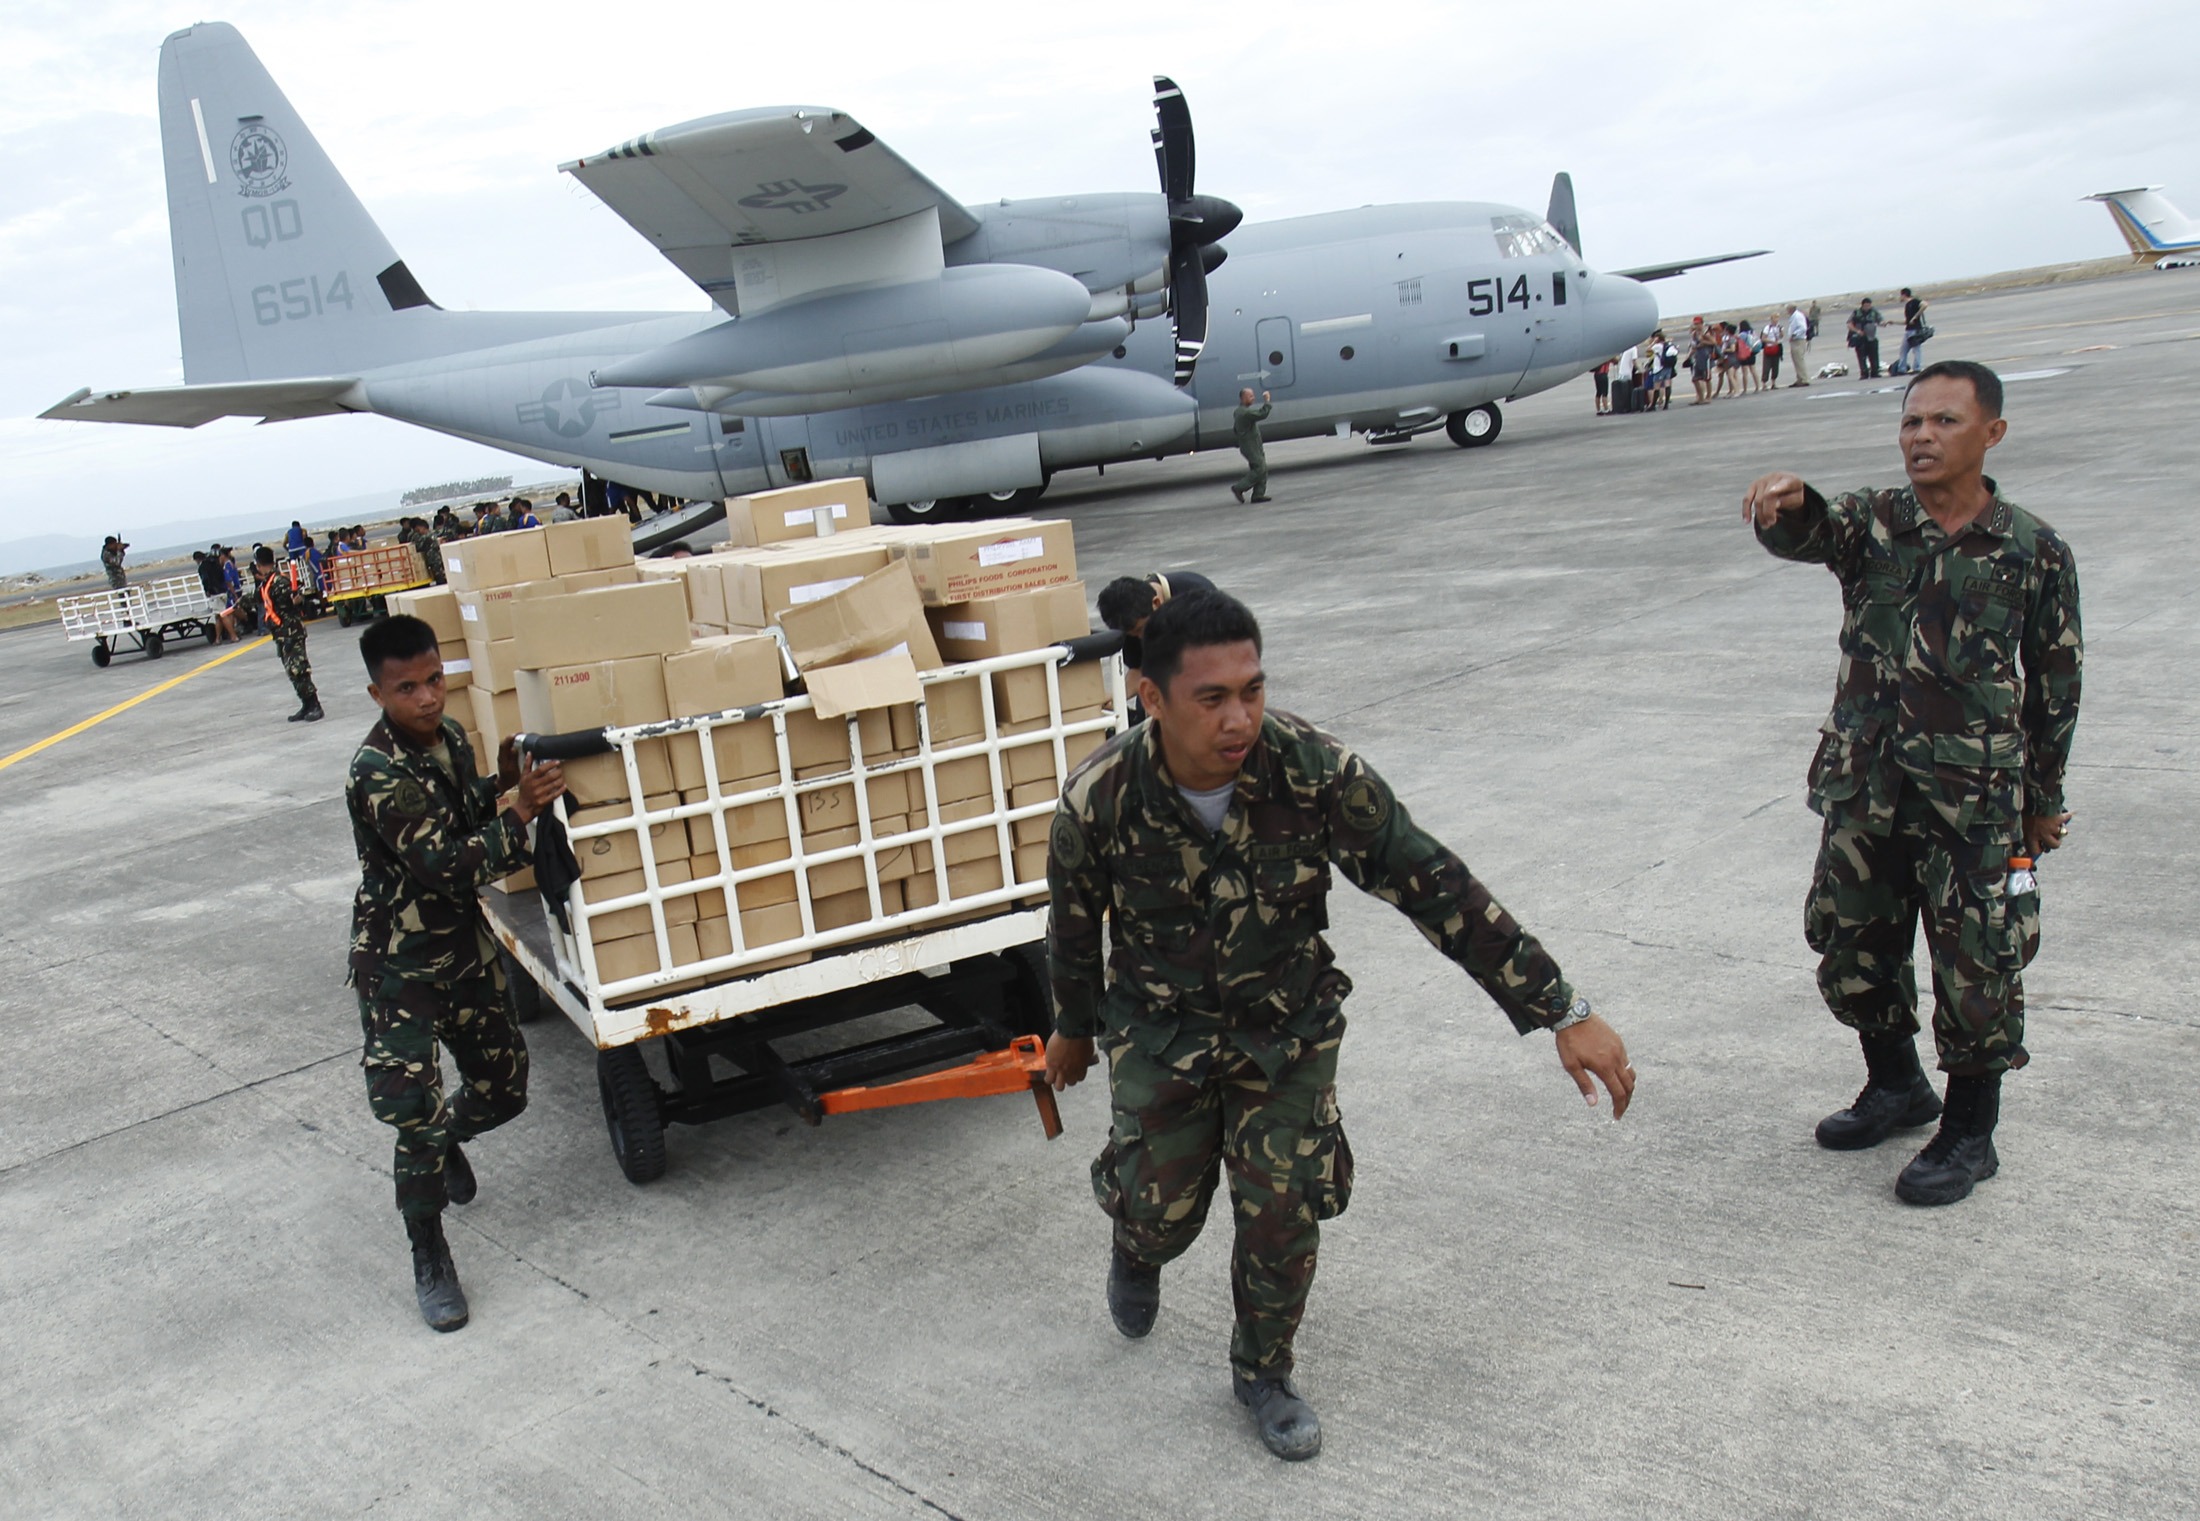 Military personnel deliver aid supplies at the destroyed airport after super typhoon Haiyan battered Tacloban city. Photo: Reuters